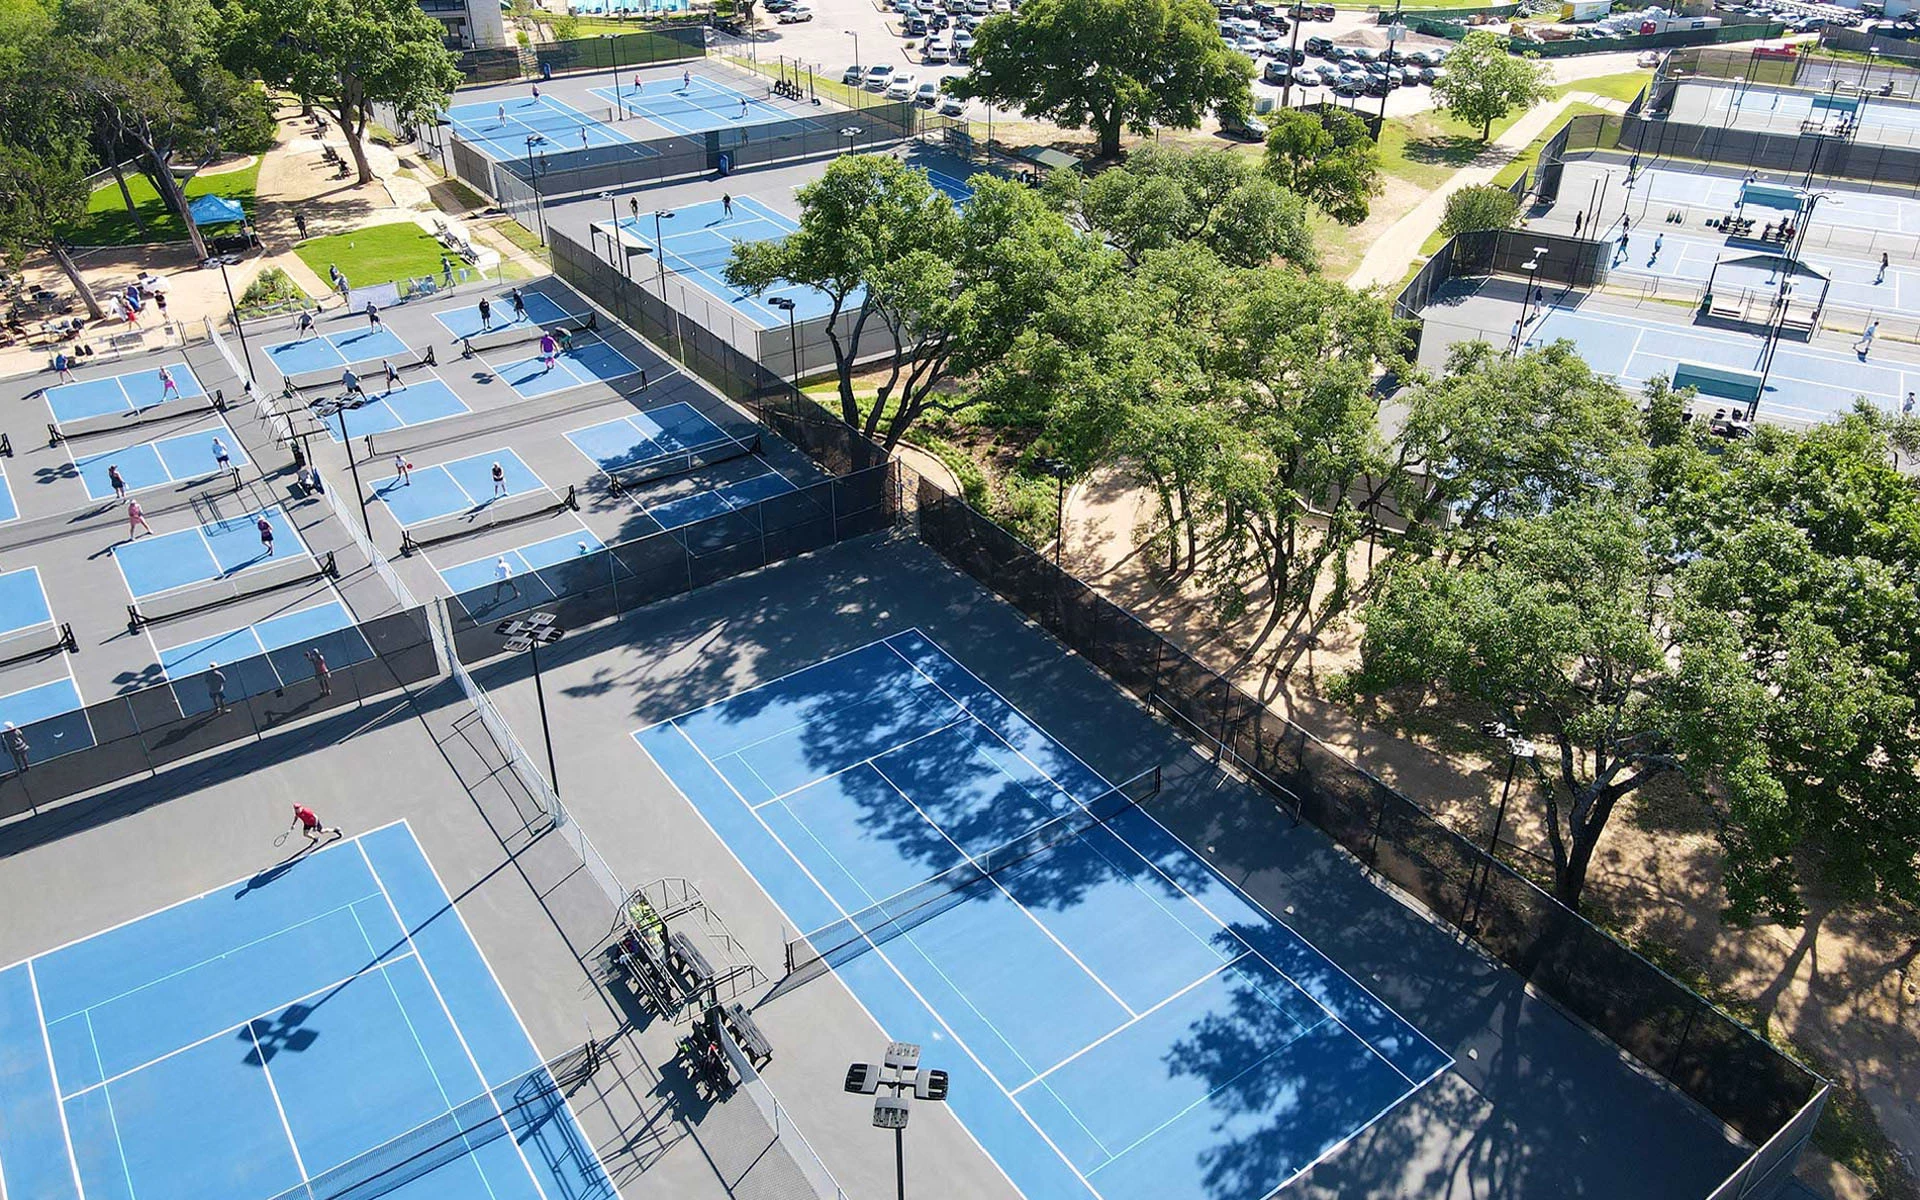 Westlake Country Club pickleball courts